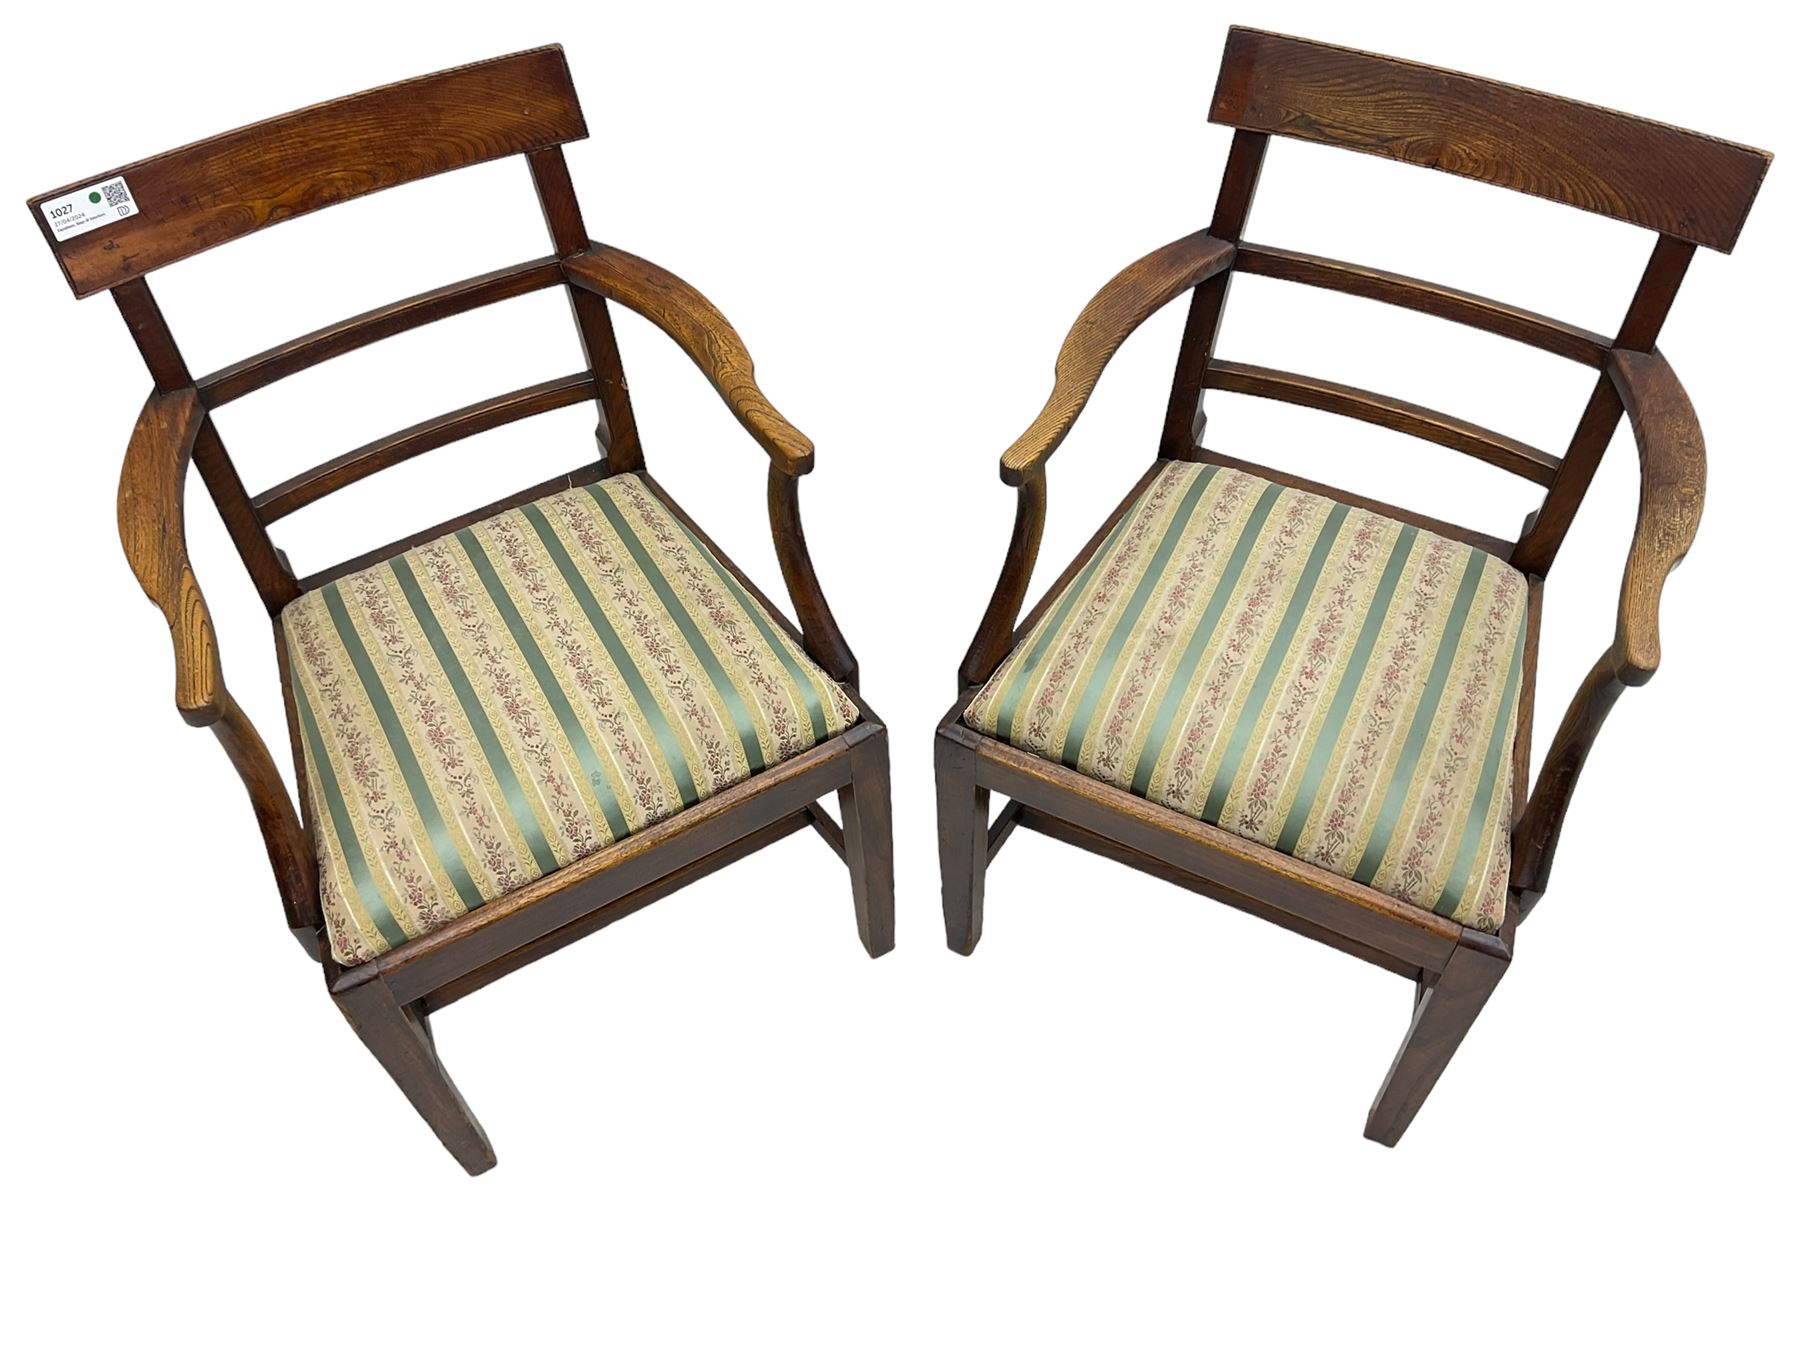 Pair of 19th century elm elbow chairs - Image 5 of 7